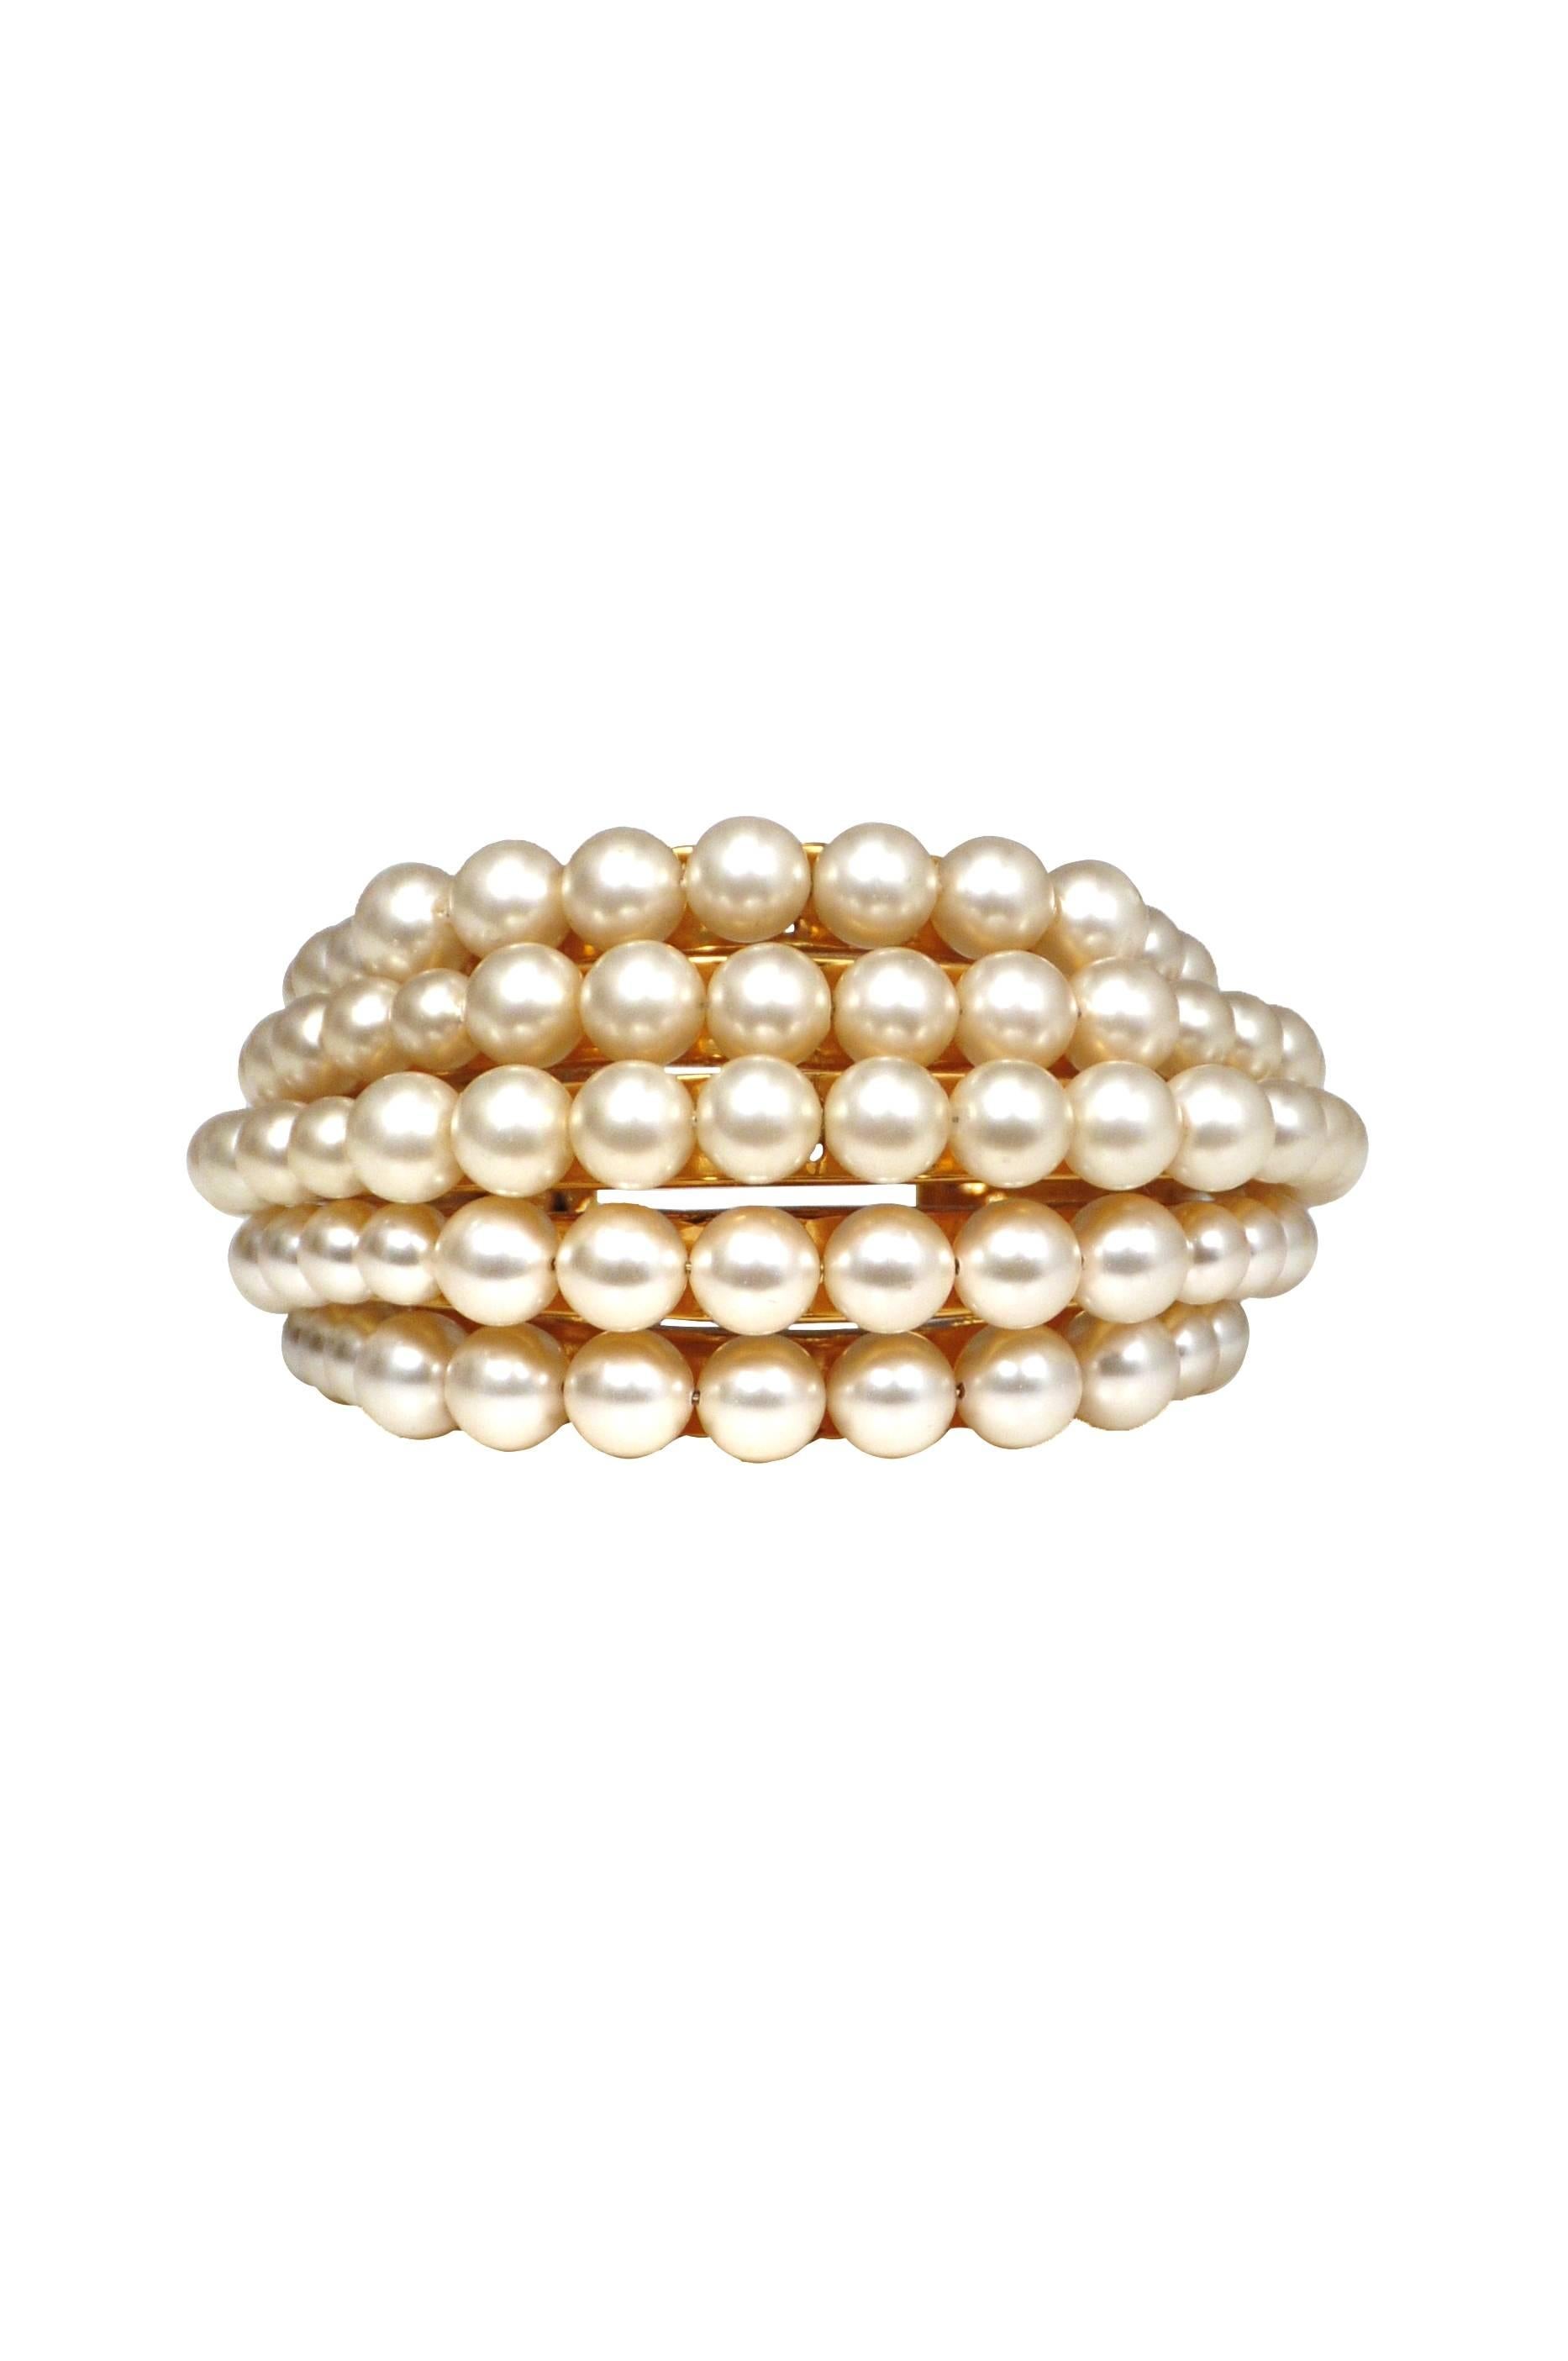 Vintage Chanel pearl bracelet featuring five rows of graduated faux pearls attached to a multi-tier gold tone cuff.